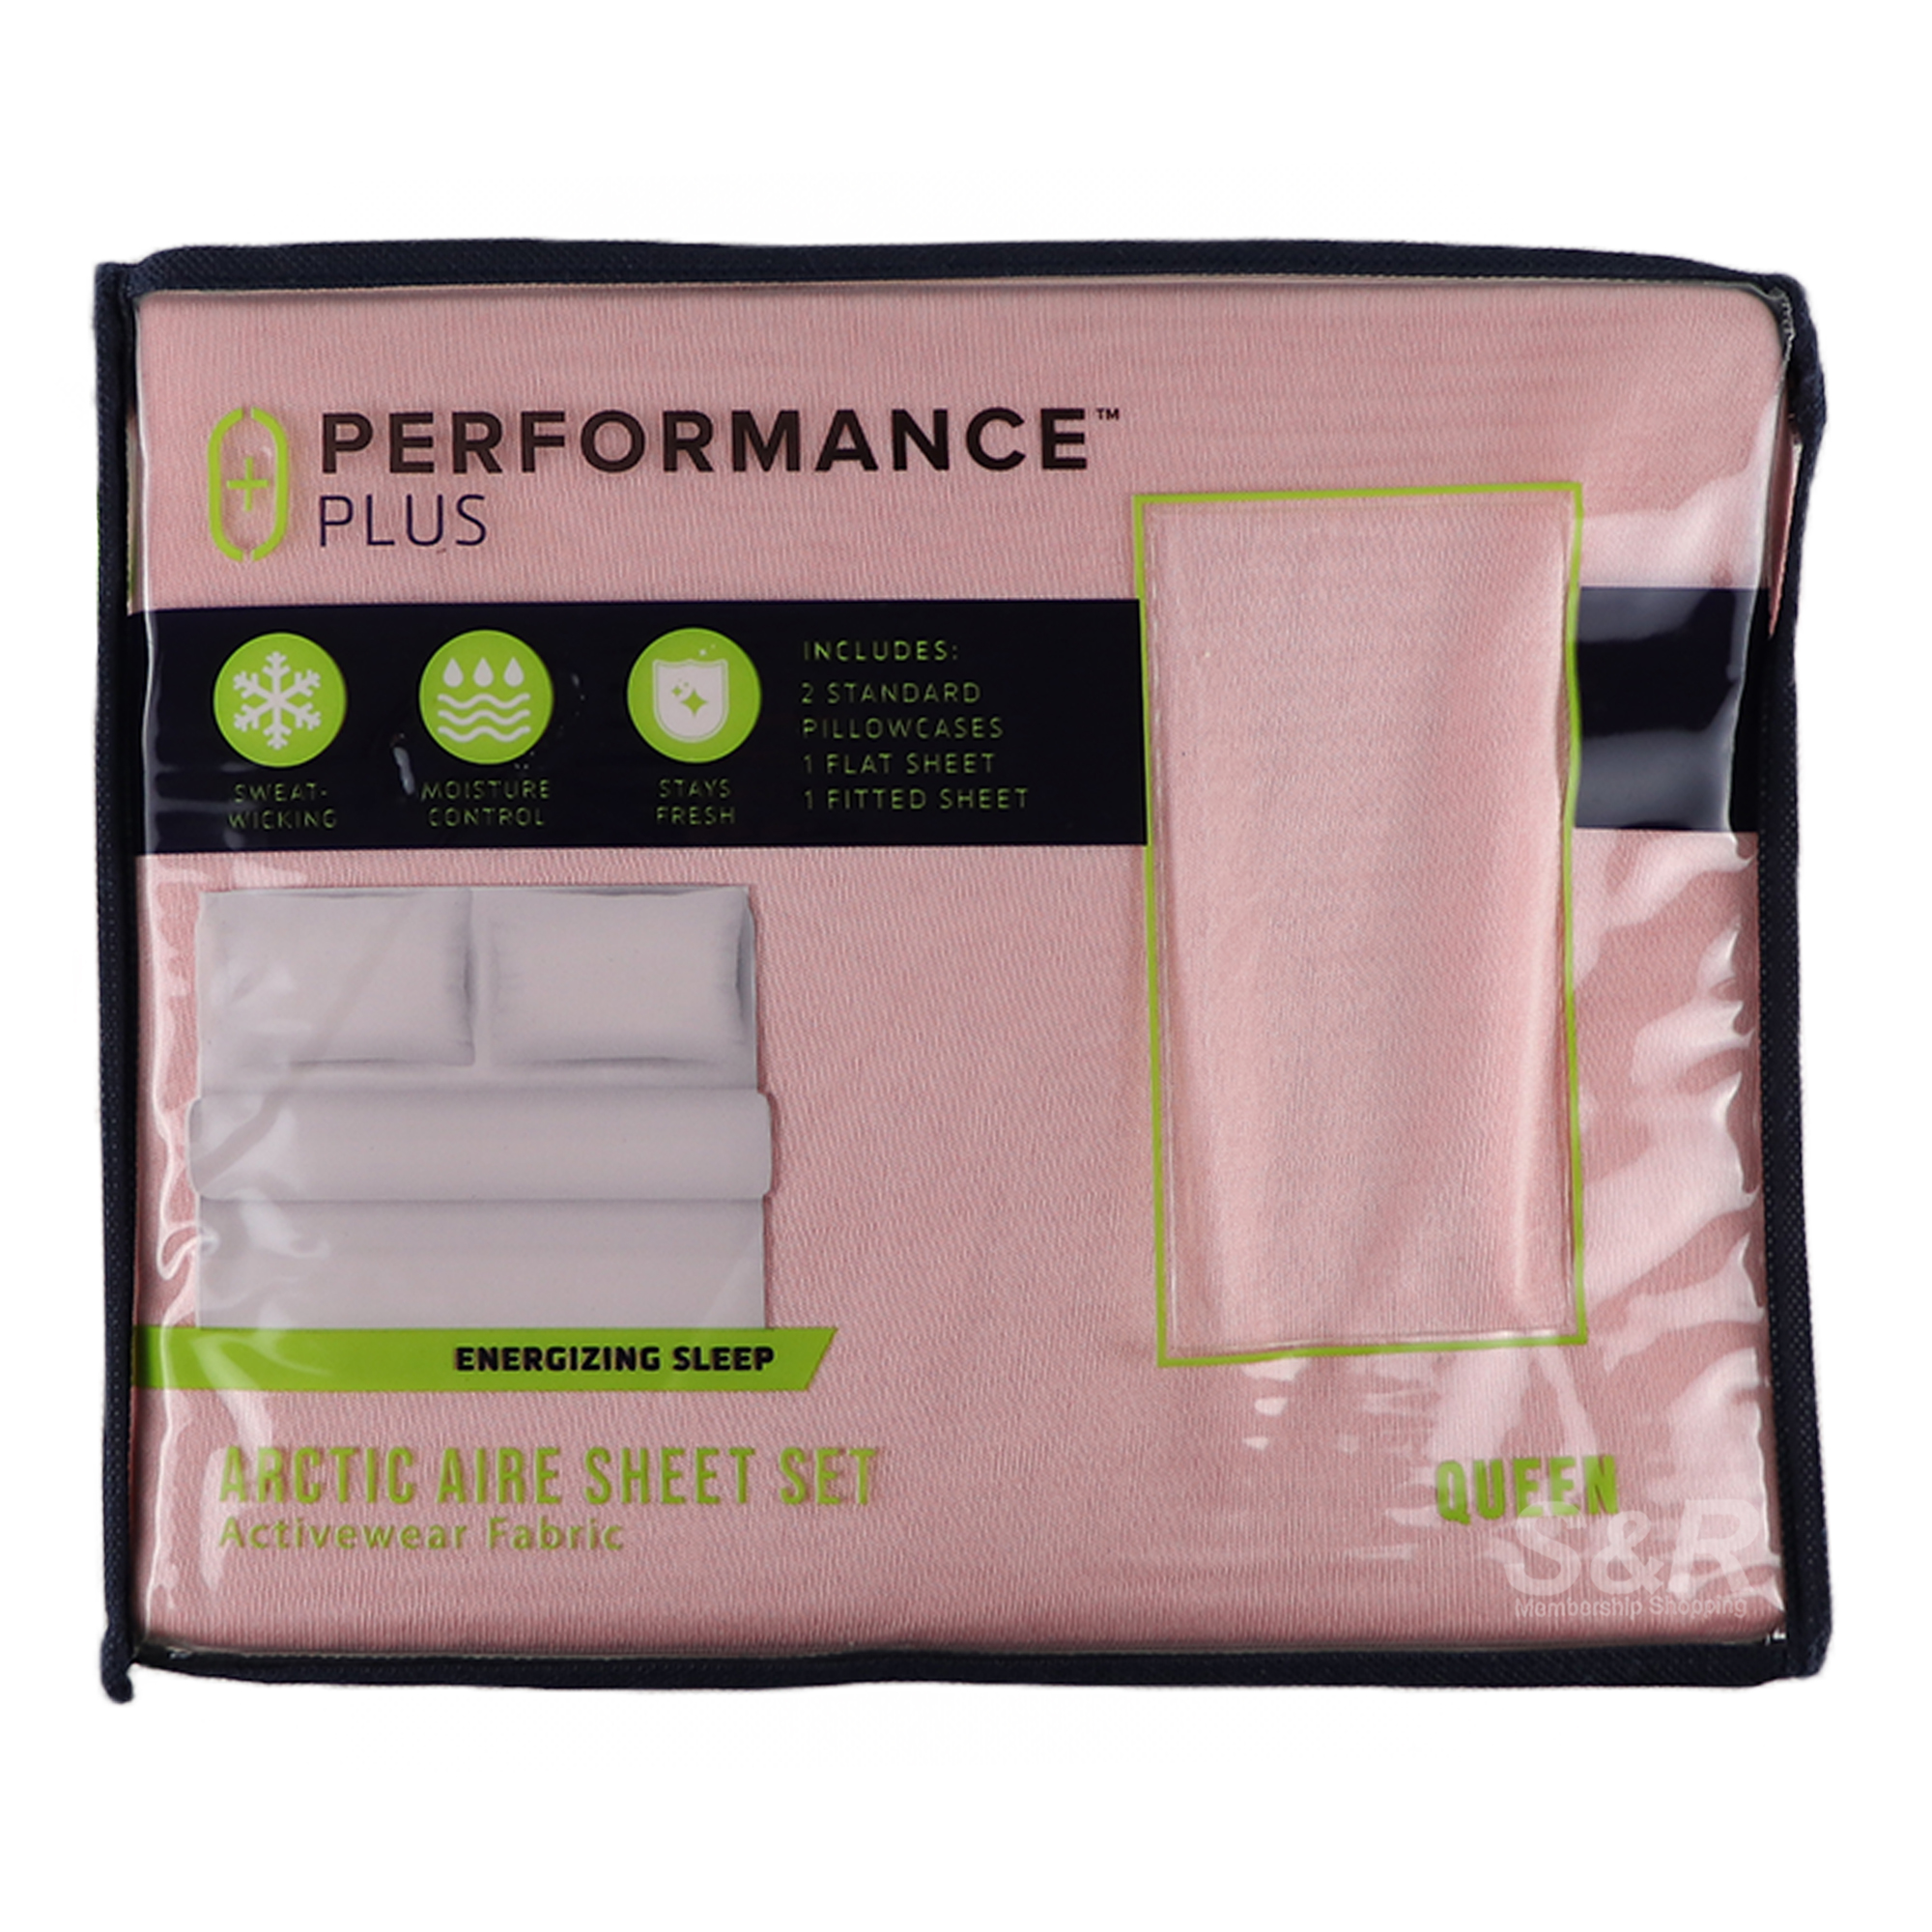 Arctic Aire Sheet Performance Fabric Queen Set